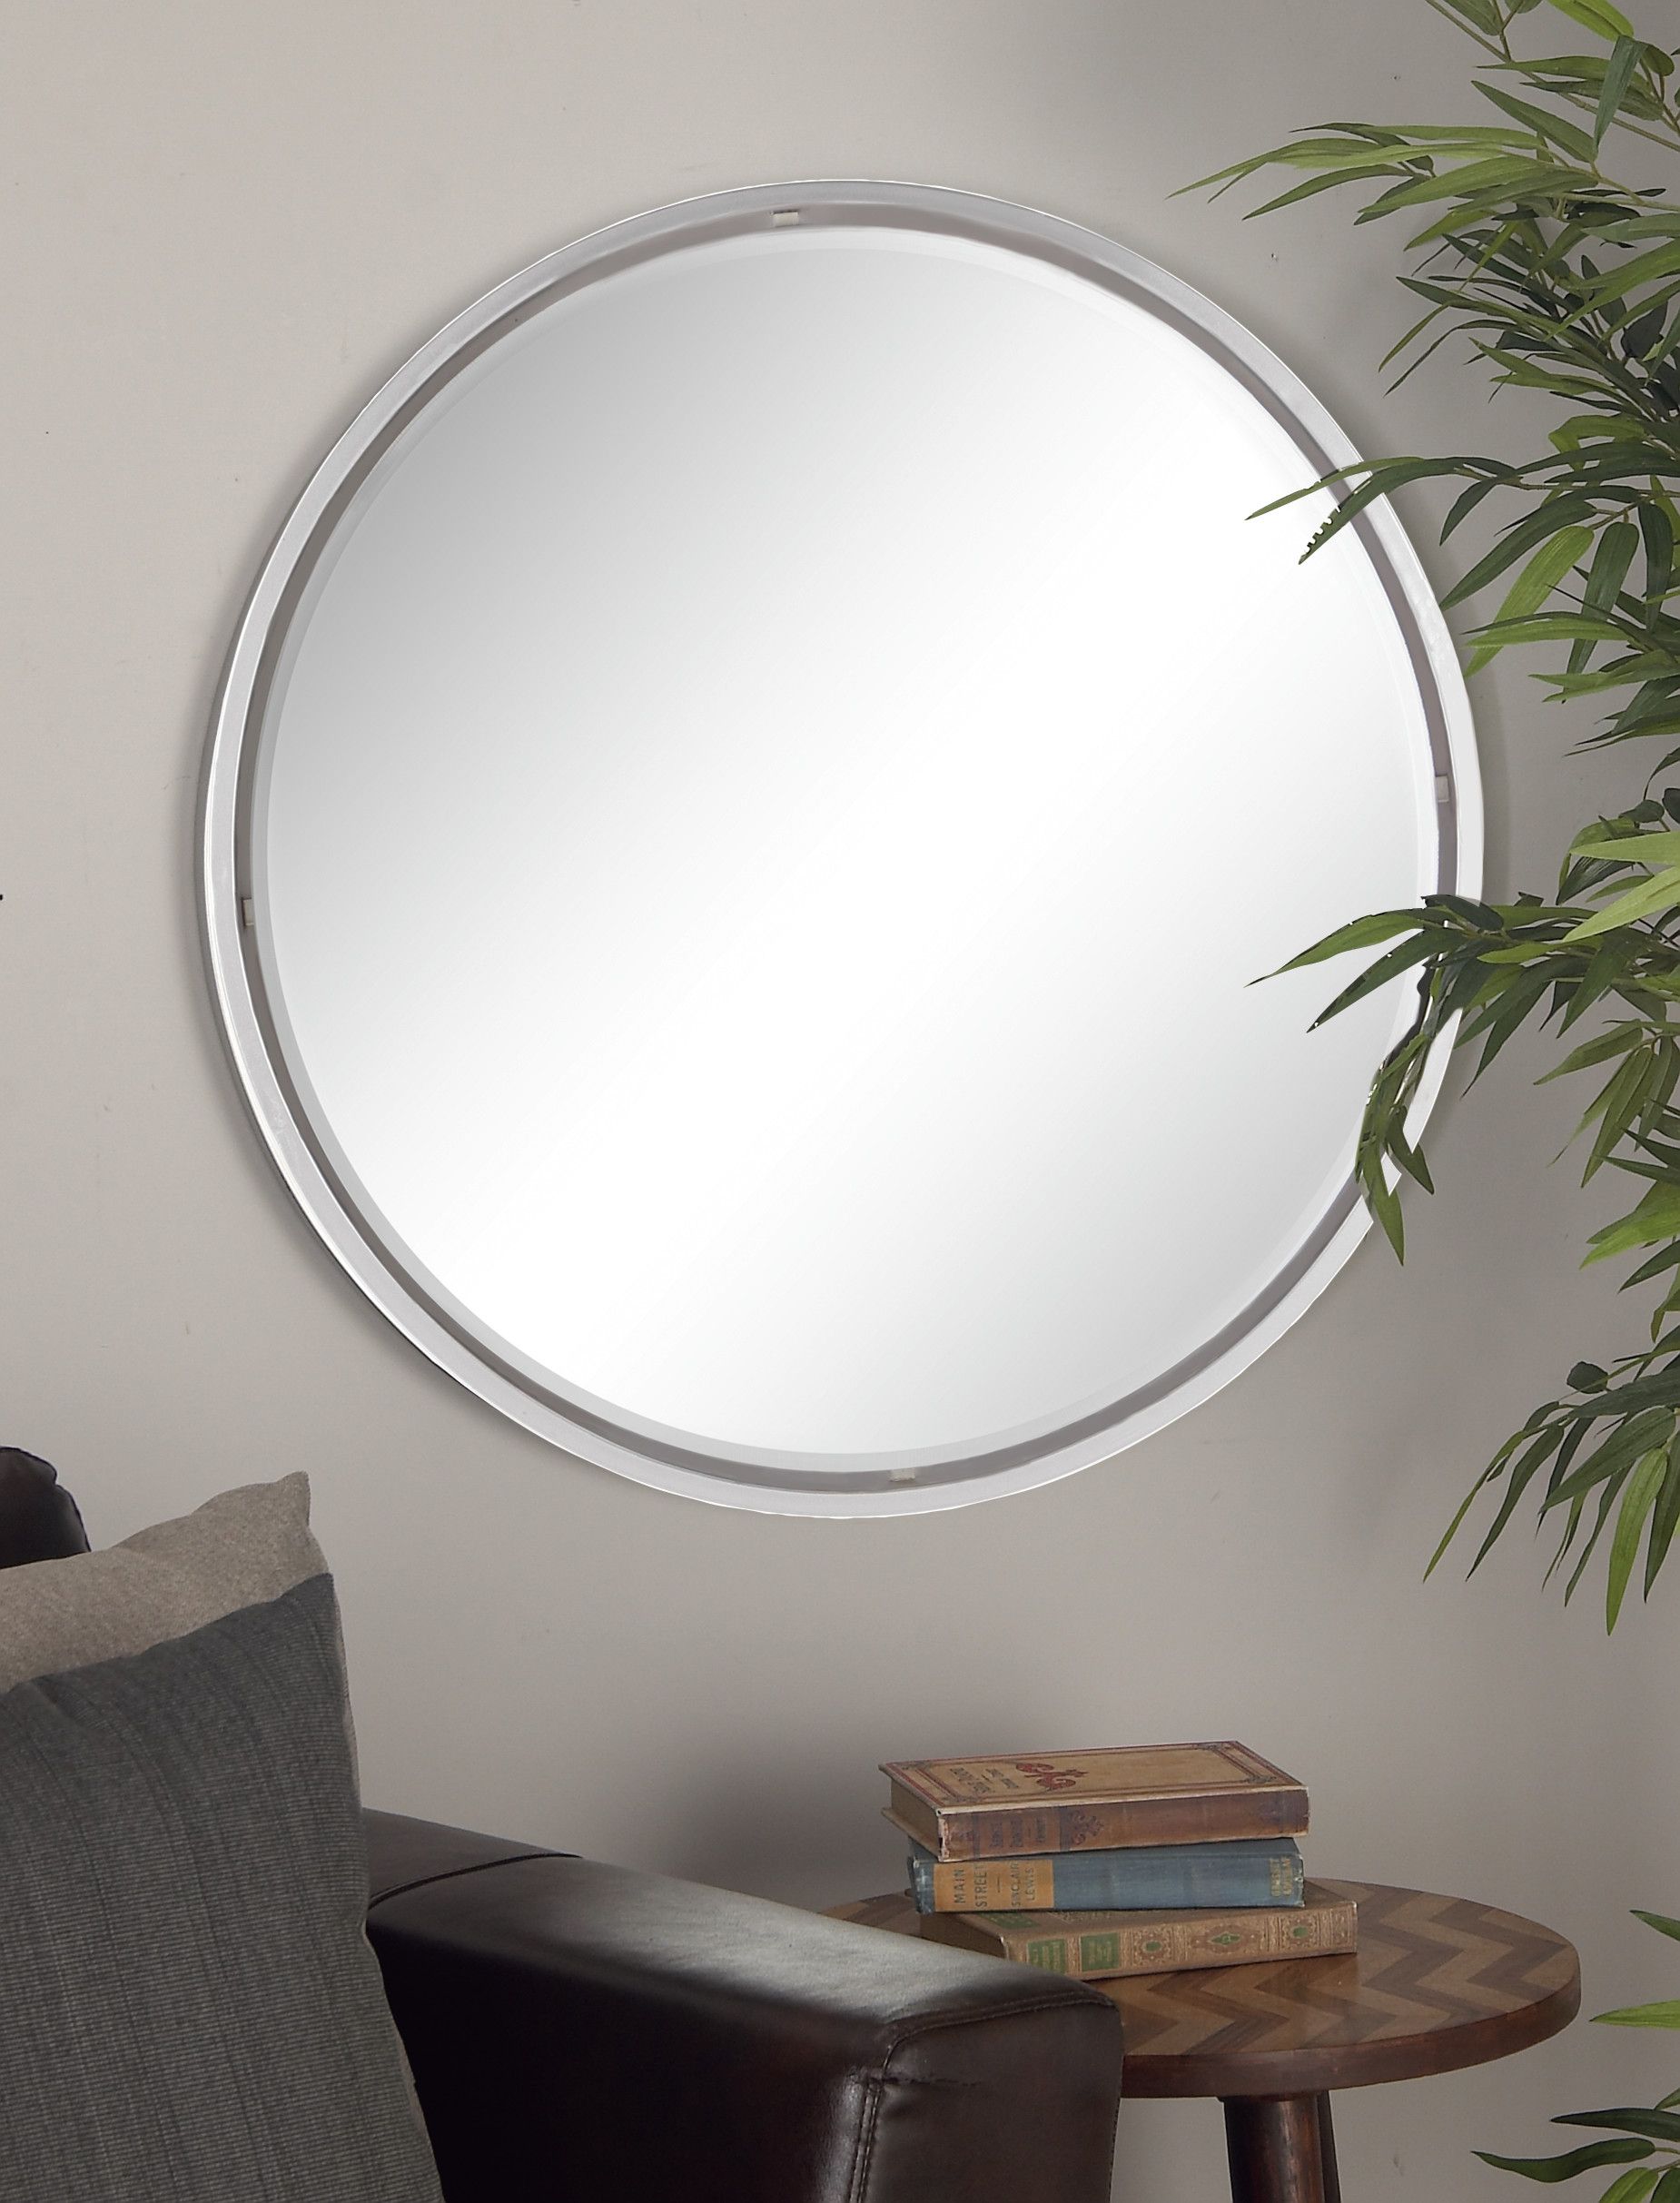 Decmode Extra Large Round Silver Wall Mirror, 30" – Walmart Within Round Scalloped Wall Mirrors (View 2 of 15)